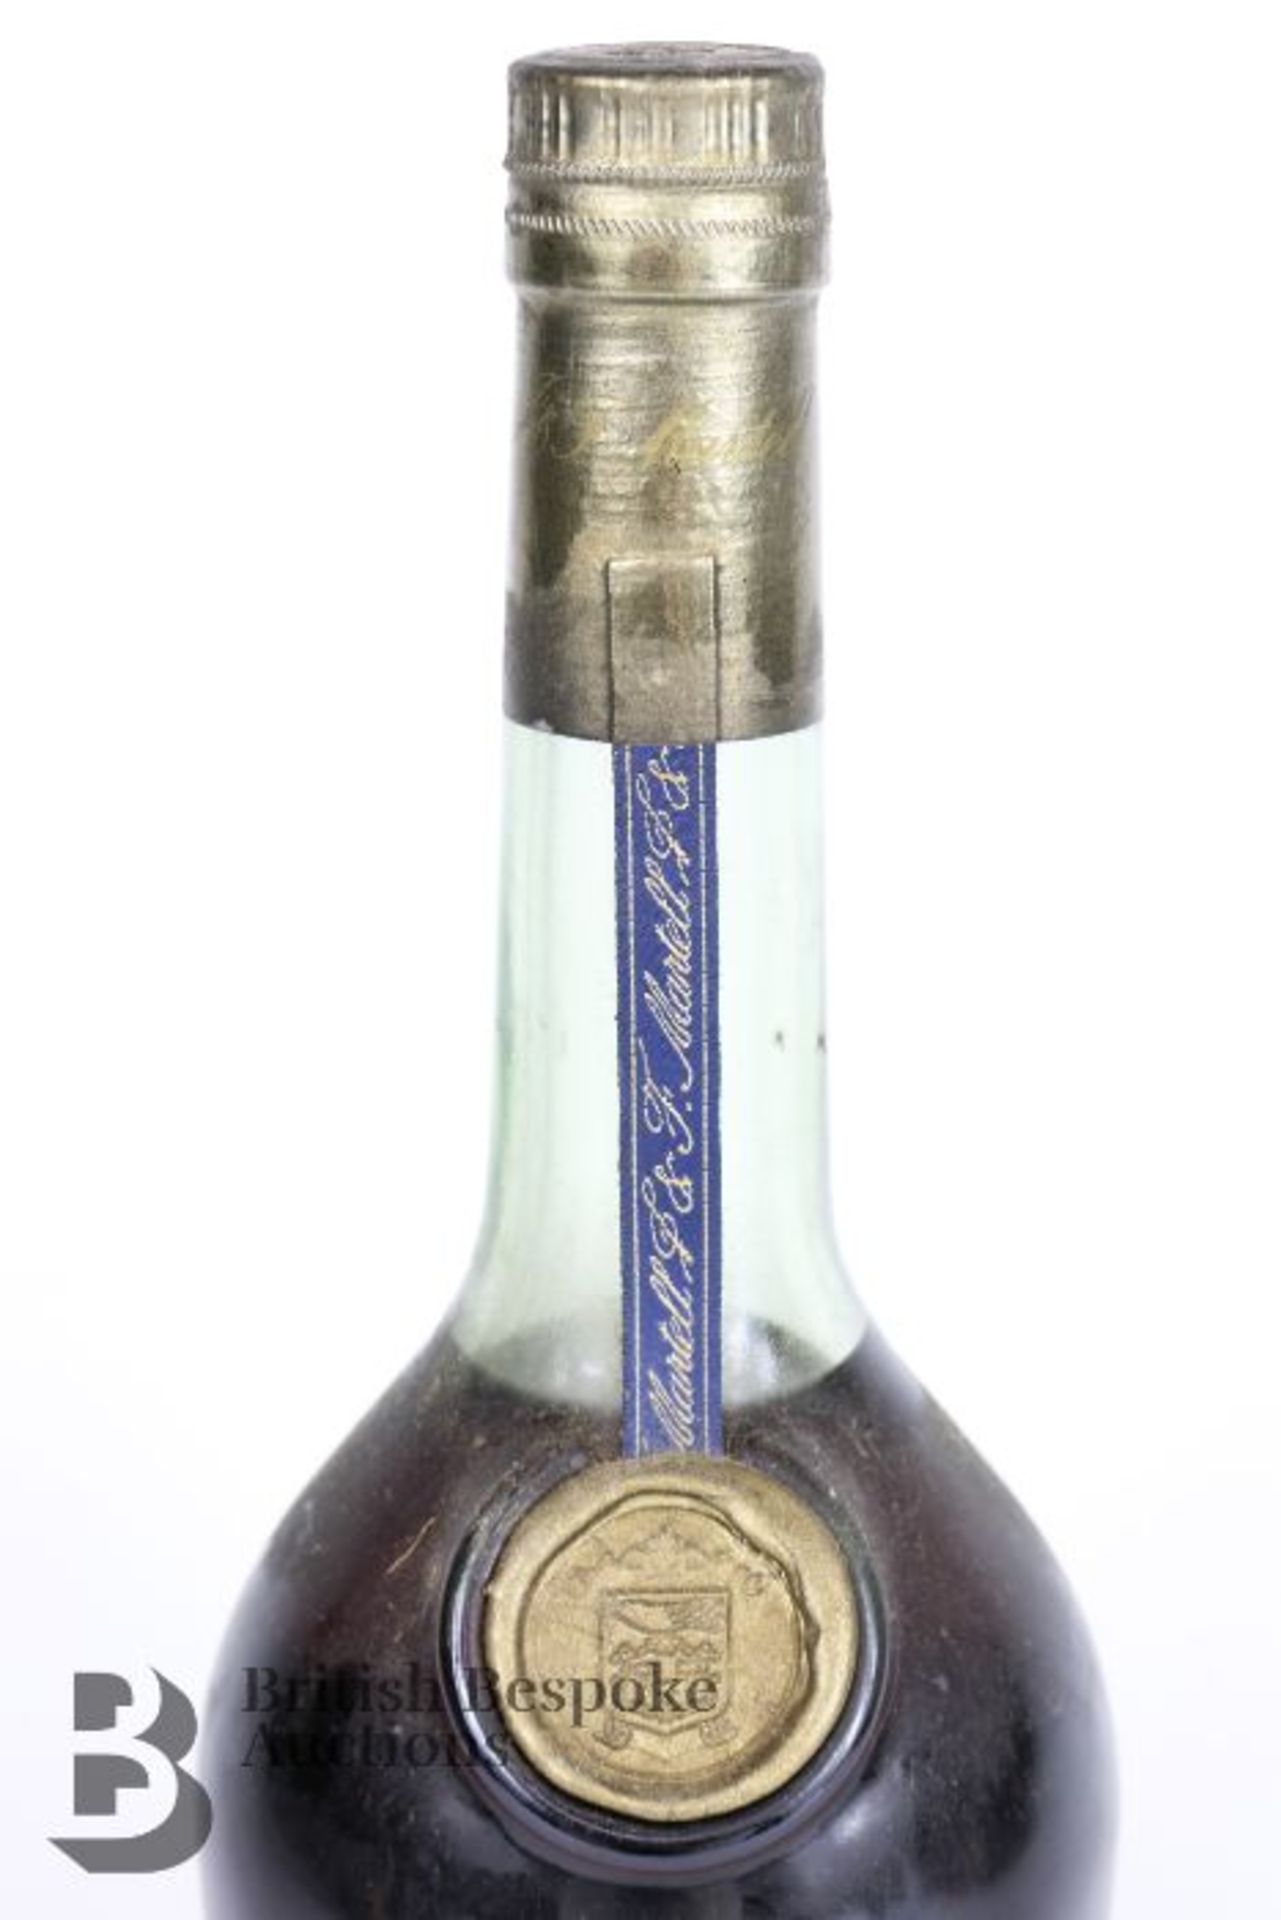 French Cognac - Image 2 of 5